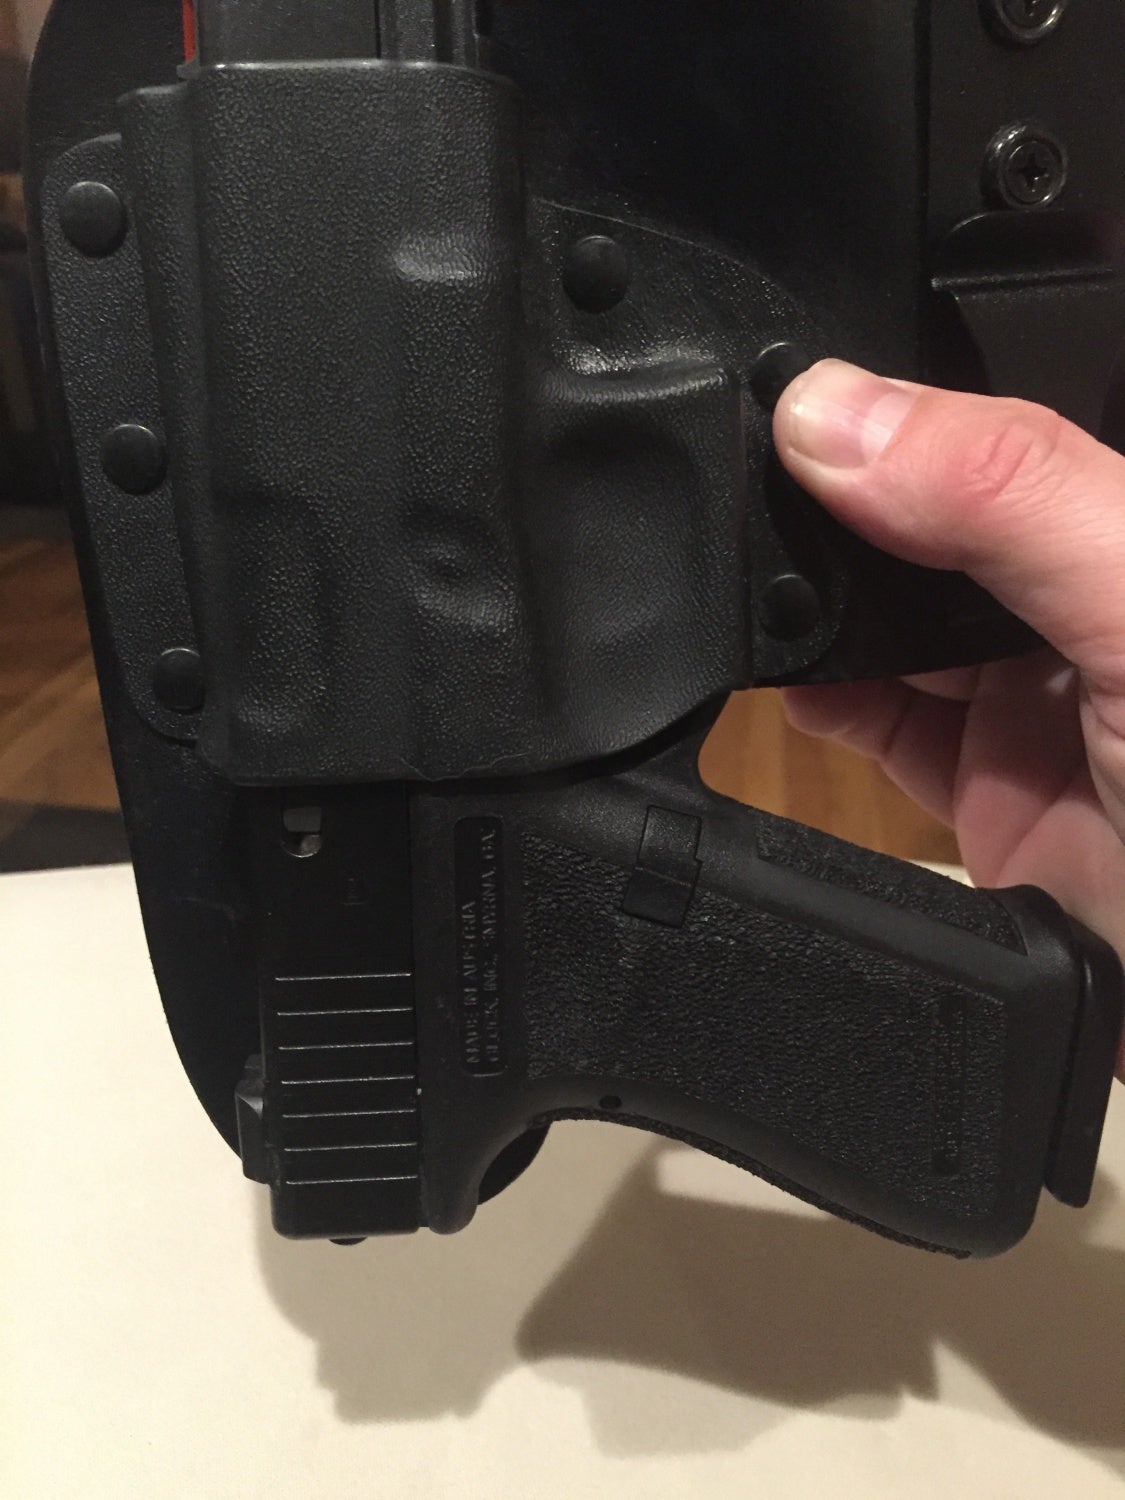 The Freedom Carry does a god job of retention. Unless I shake the holster aggressively, the pistol will stay in the holster.